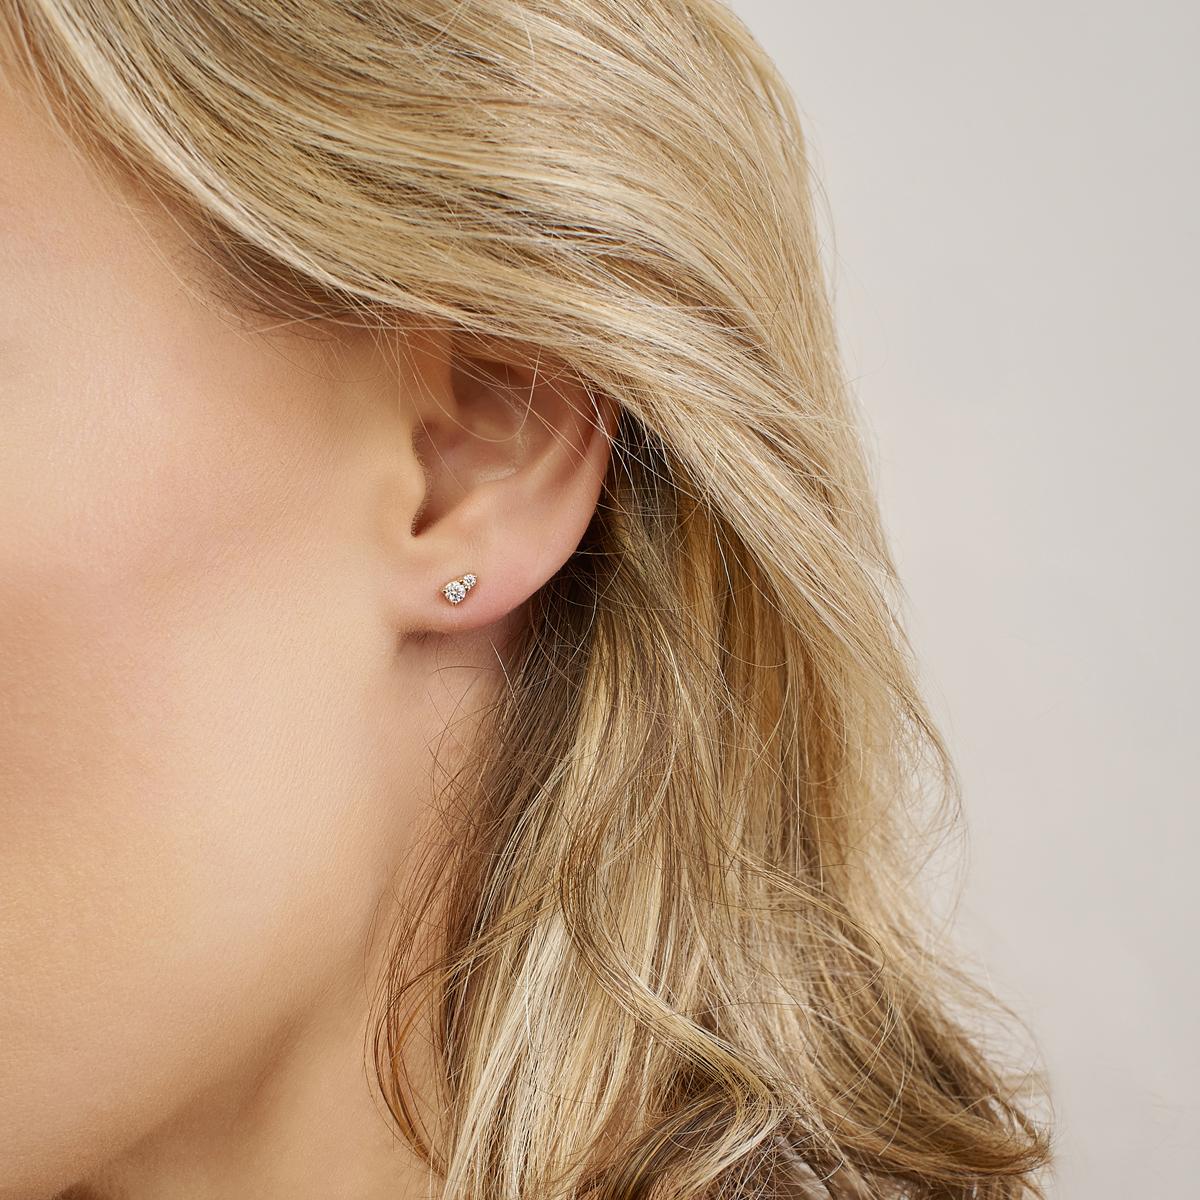 For those that have an understated aesthetic yet still love a little sparkle, SELIN KENT's Ayda earrings in 14k yellow gold feature two perfectly proportioned white diamonds. A lovely alternative to traditional diamond studs. 

Diamond carat weight: